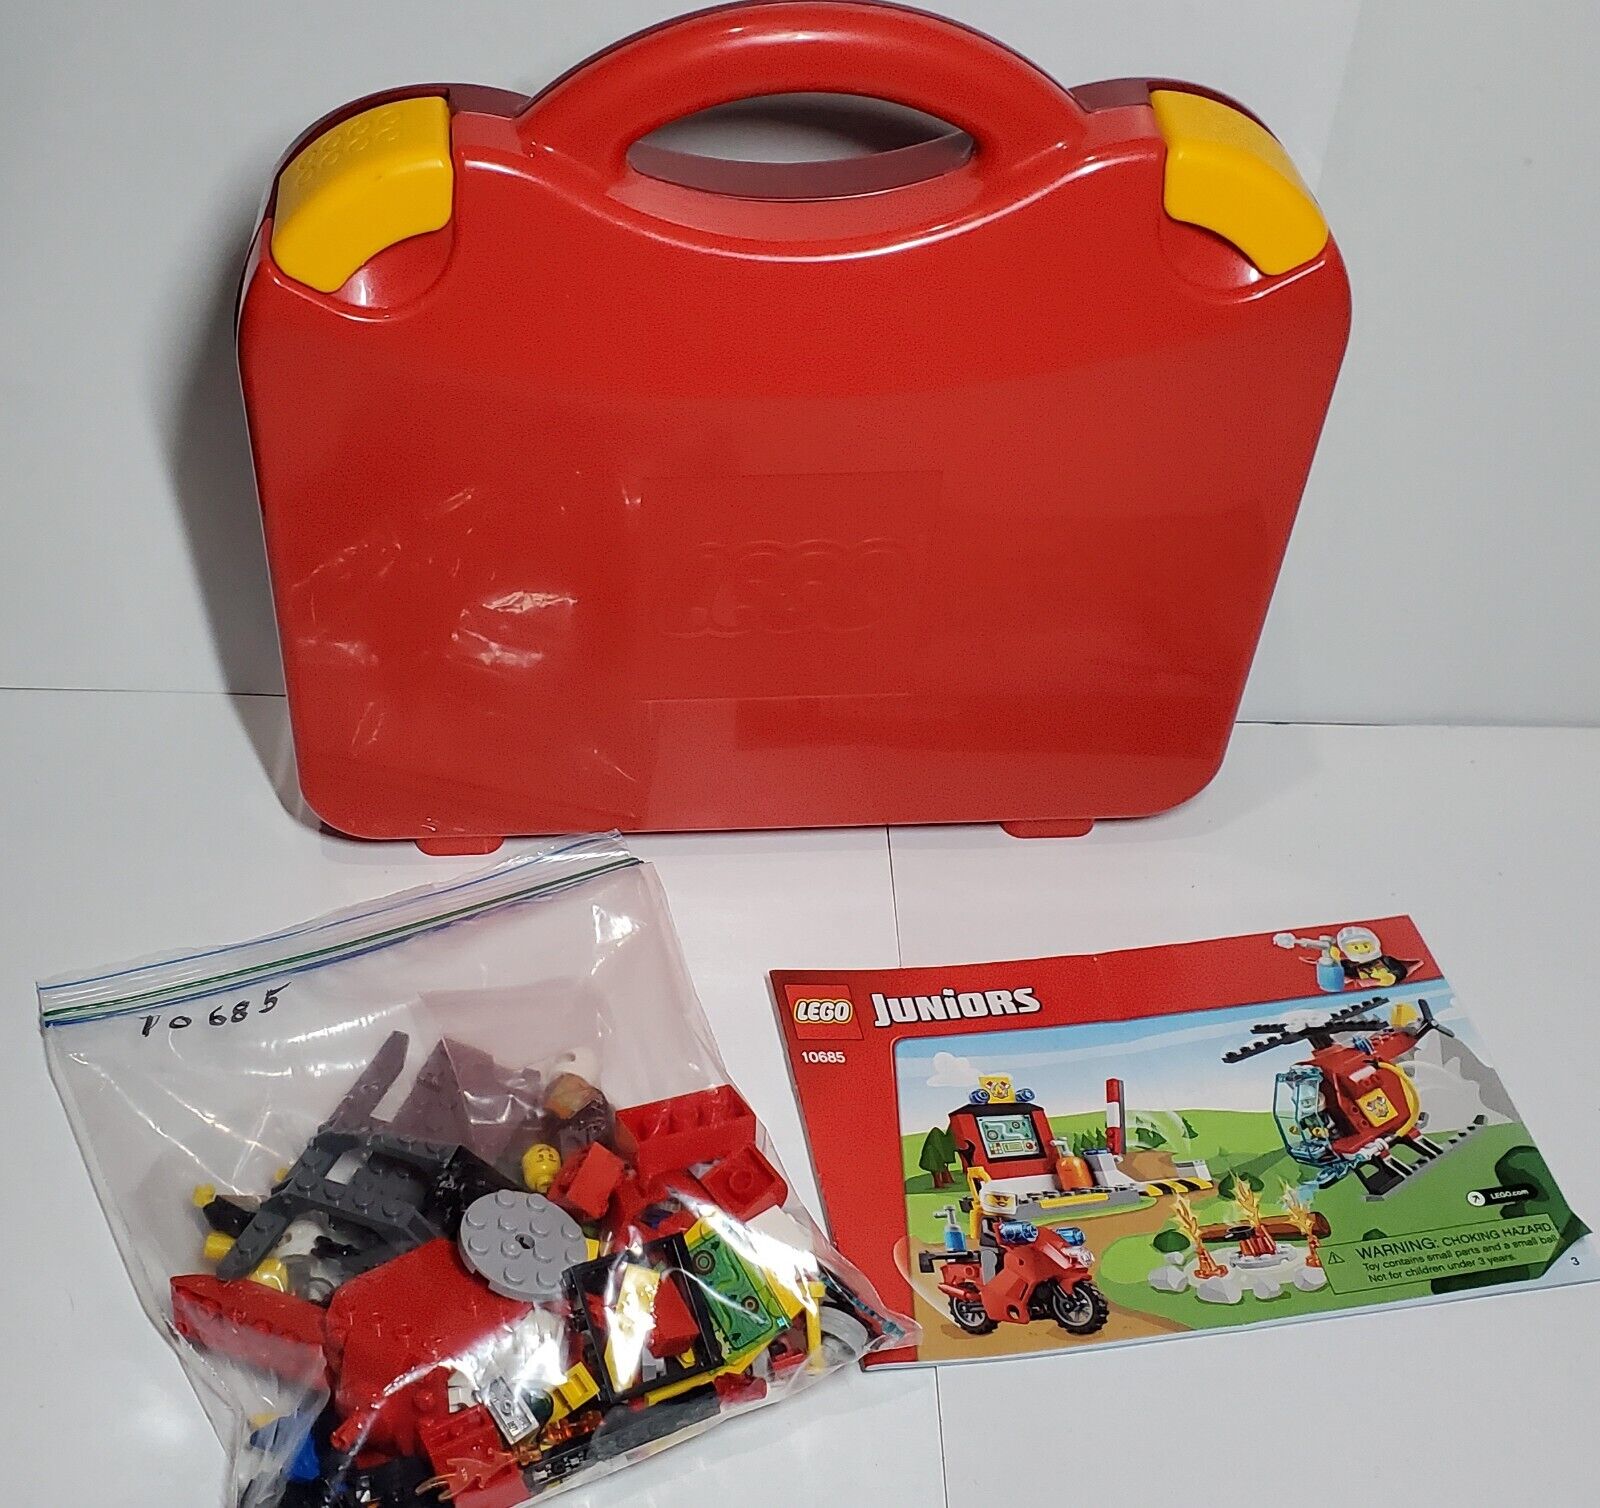 LEGO Juniors: Fire: Fire Suitcase 10685 w manual. Complete with case